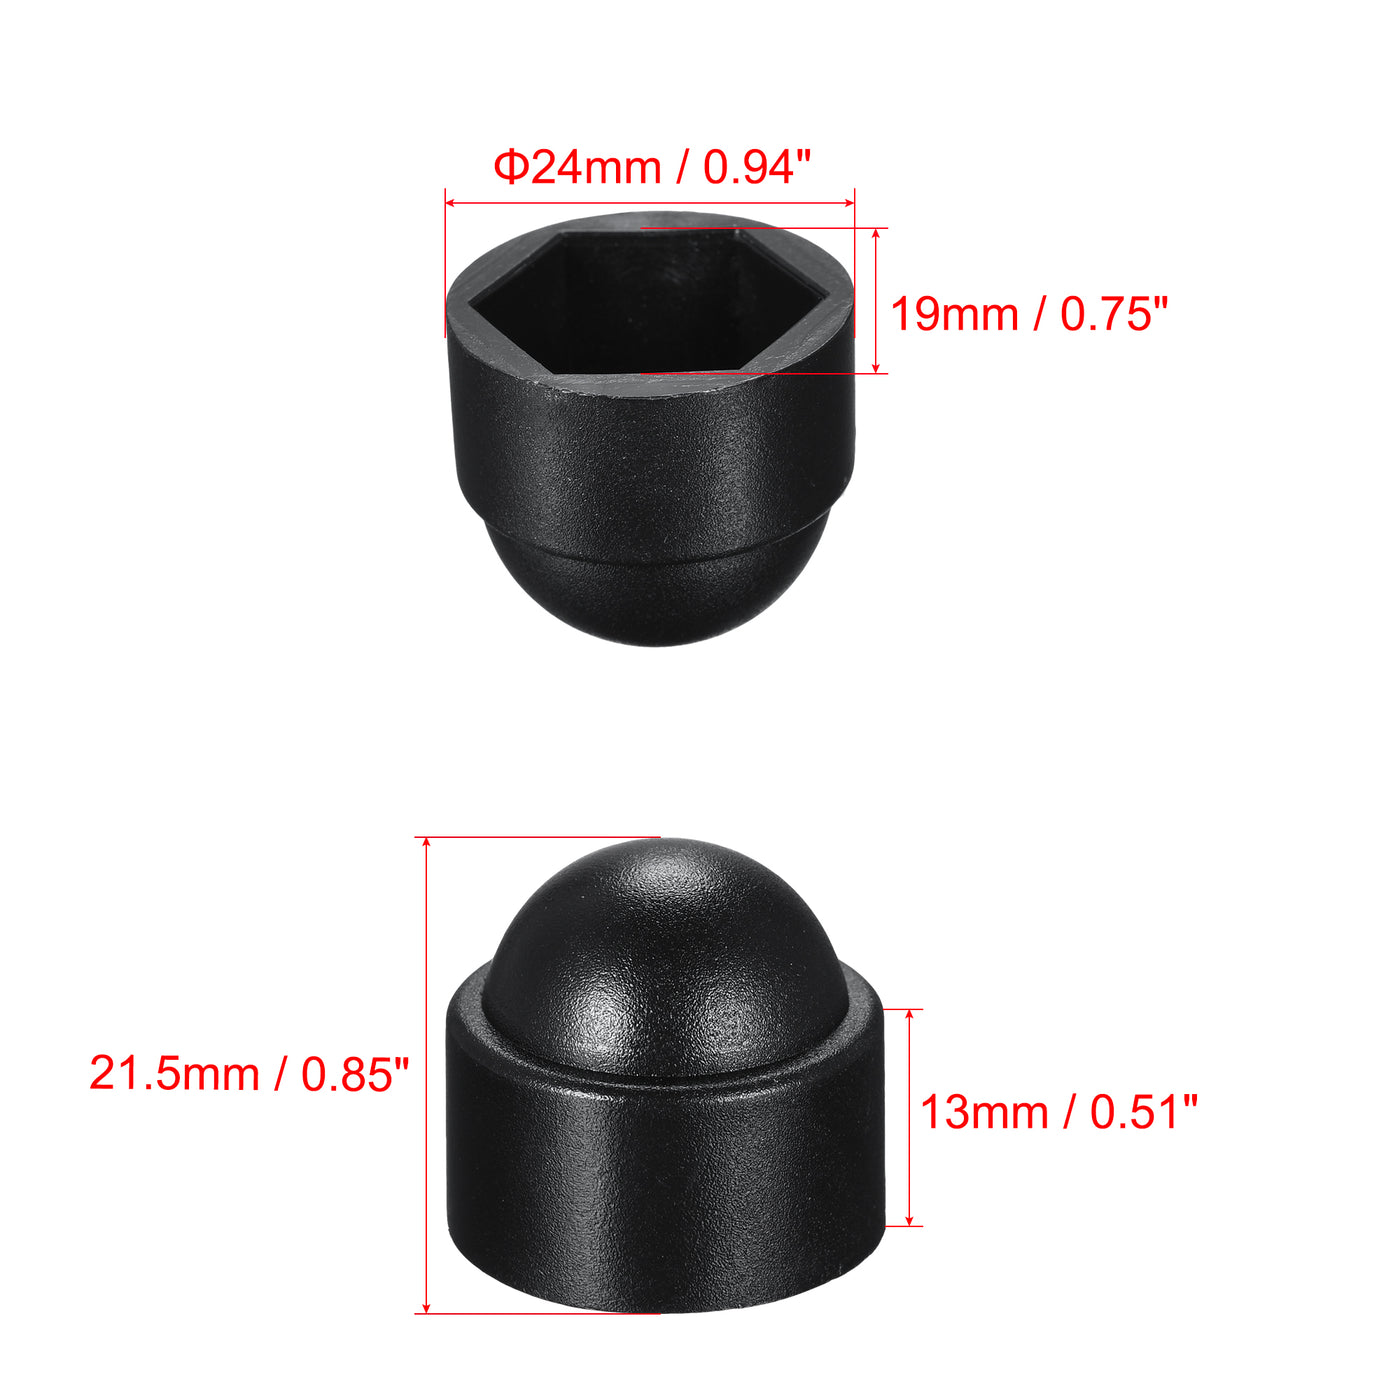 uxcell Uxcell 50pcs Plastic Dome Bolt Nut Protection Cap M12 / 19mm Hex Screw Cover Black